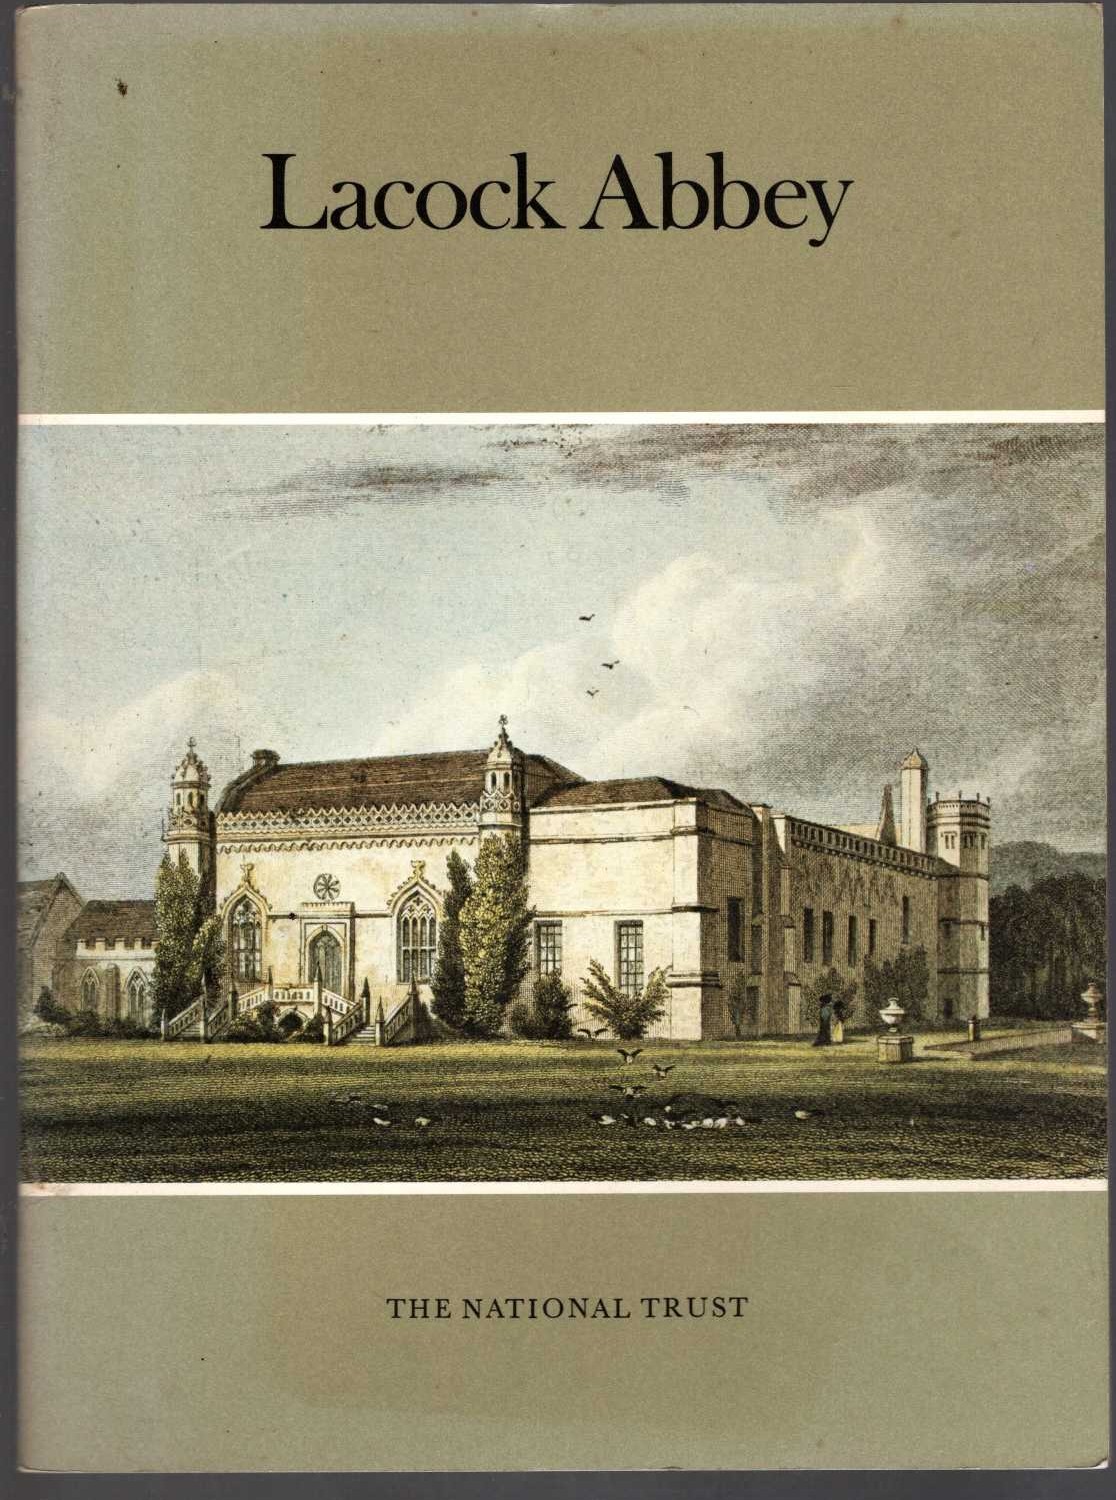 The National Trust  LACOCK ABBEY (Wiltshire) front book cover image